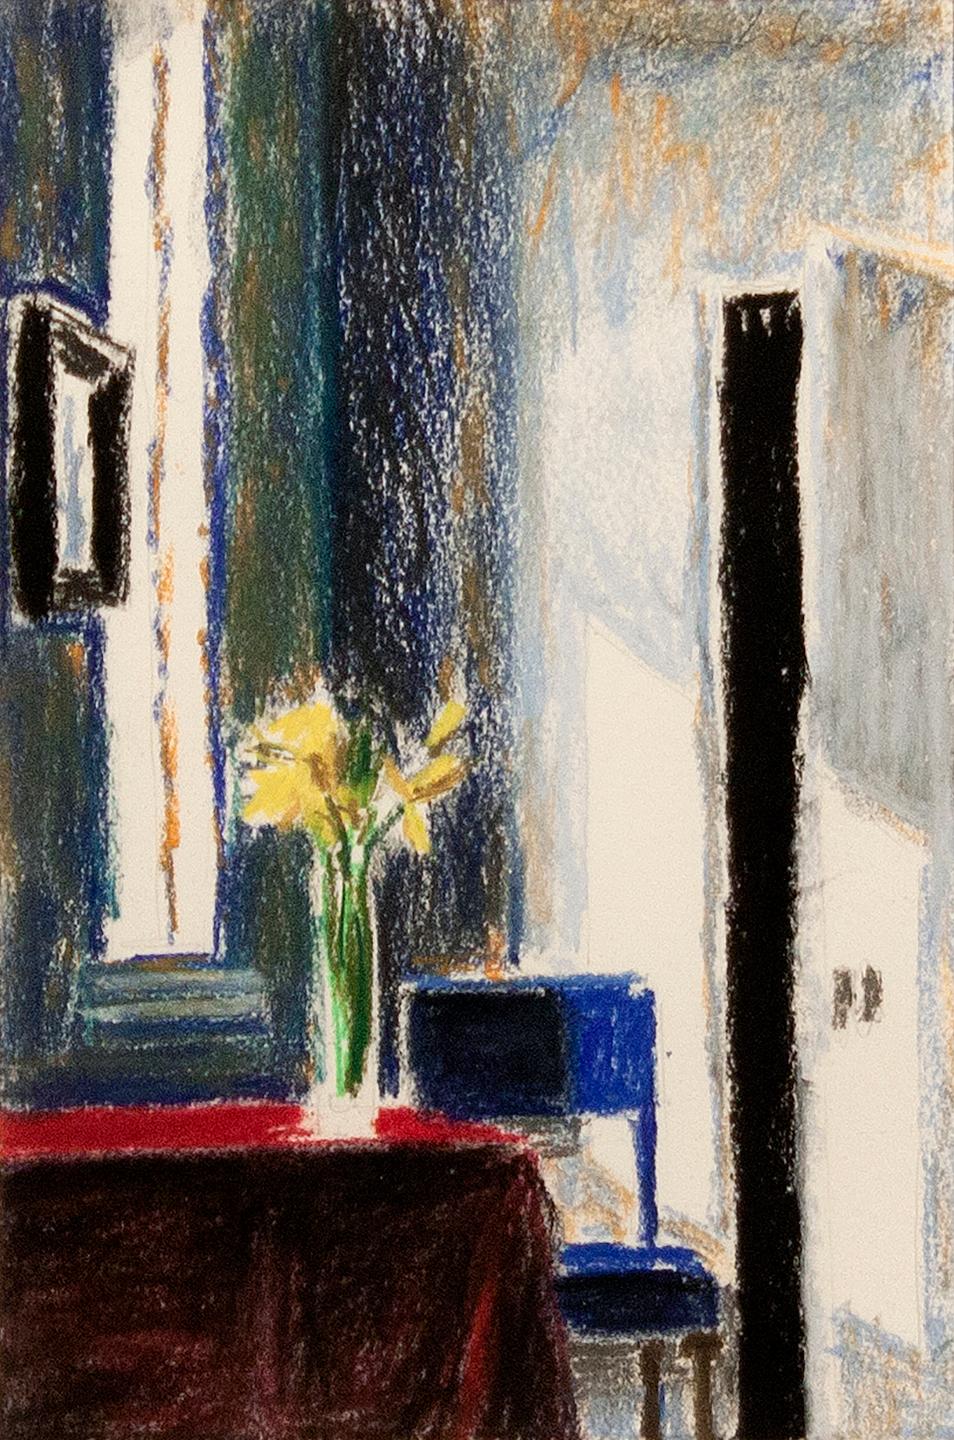 Interior with Daffodils and Blue Chair - Art by Bruce Cohen